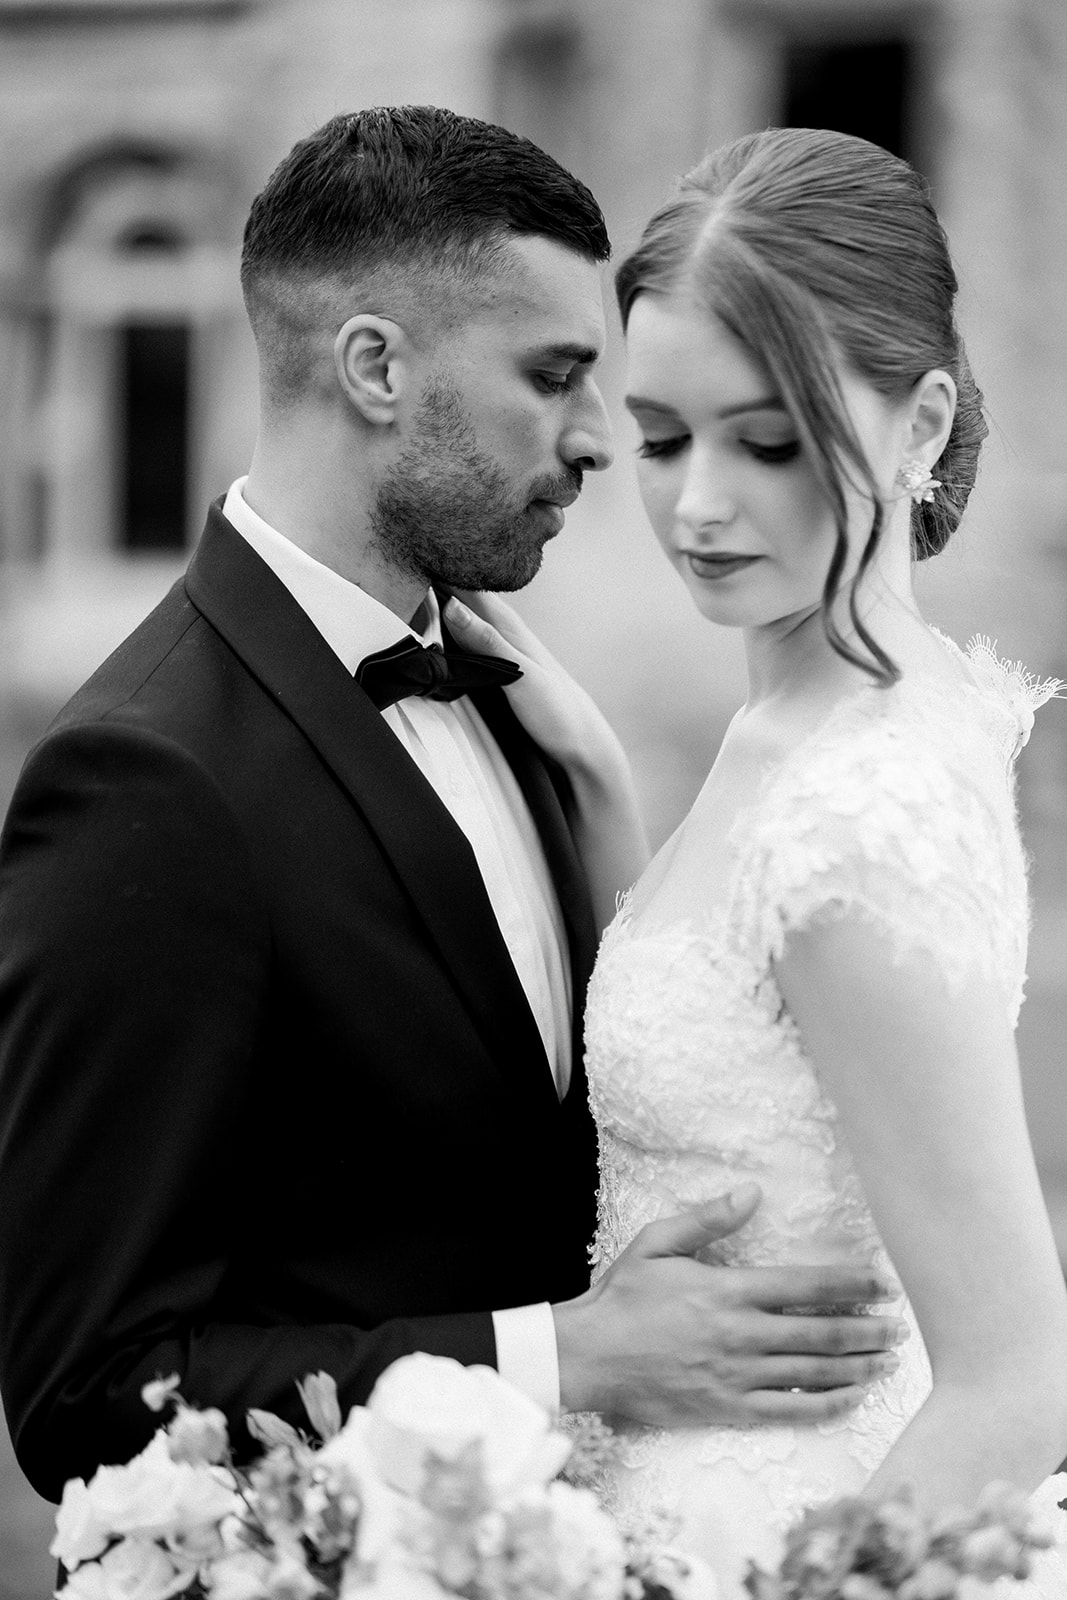 a couple's intimate embrace, with focus on the bride's lace sleeve and the groom's black bow tie.